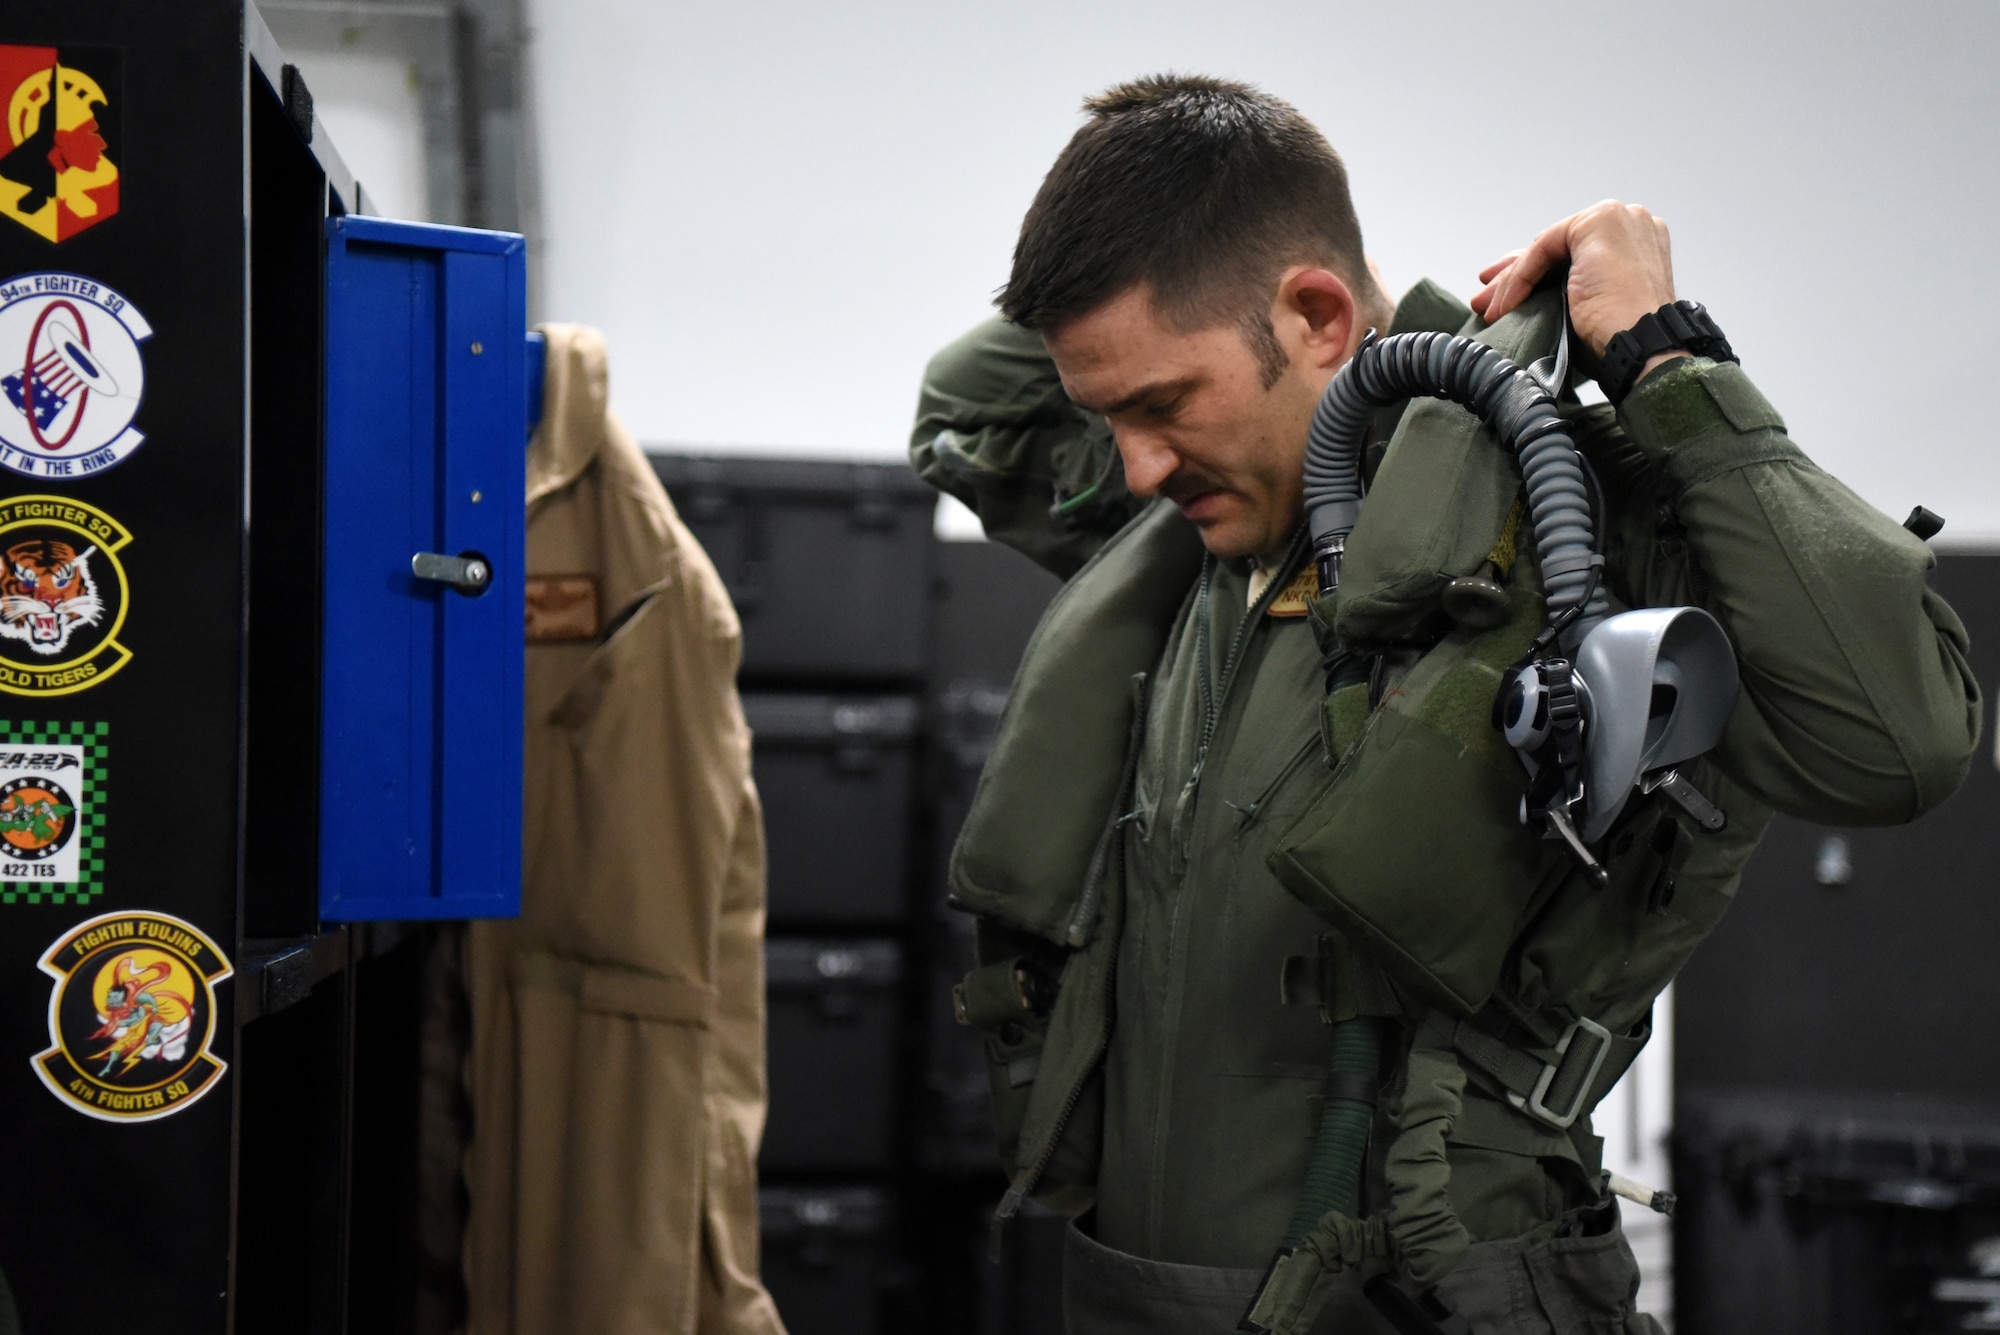 An F-35A Lightning II pilot assigned to the 4th Expeditionary Fighter Squadron dons a sleeveless flight jacket in preparation for the first combat sortie in the U.S. Air Forces Central Command area of responsibility April 26, 2019, Al Dhafra Air Base, United Arab Emirates.